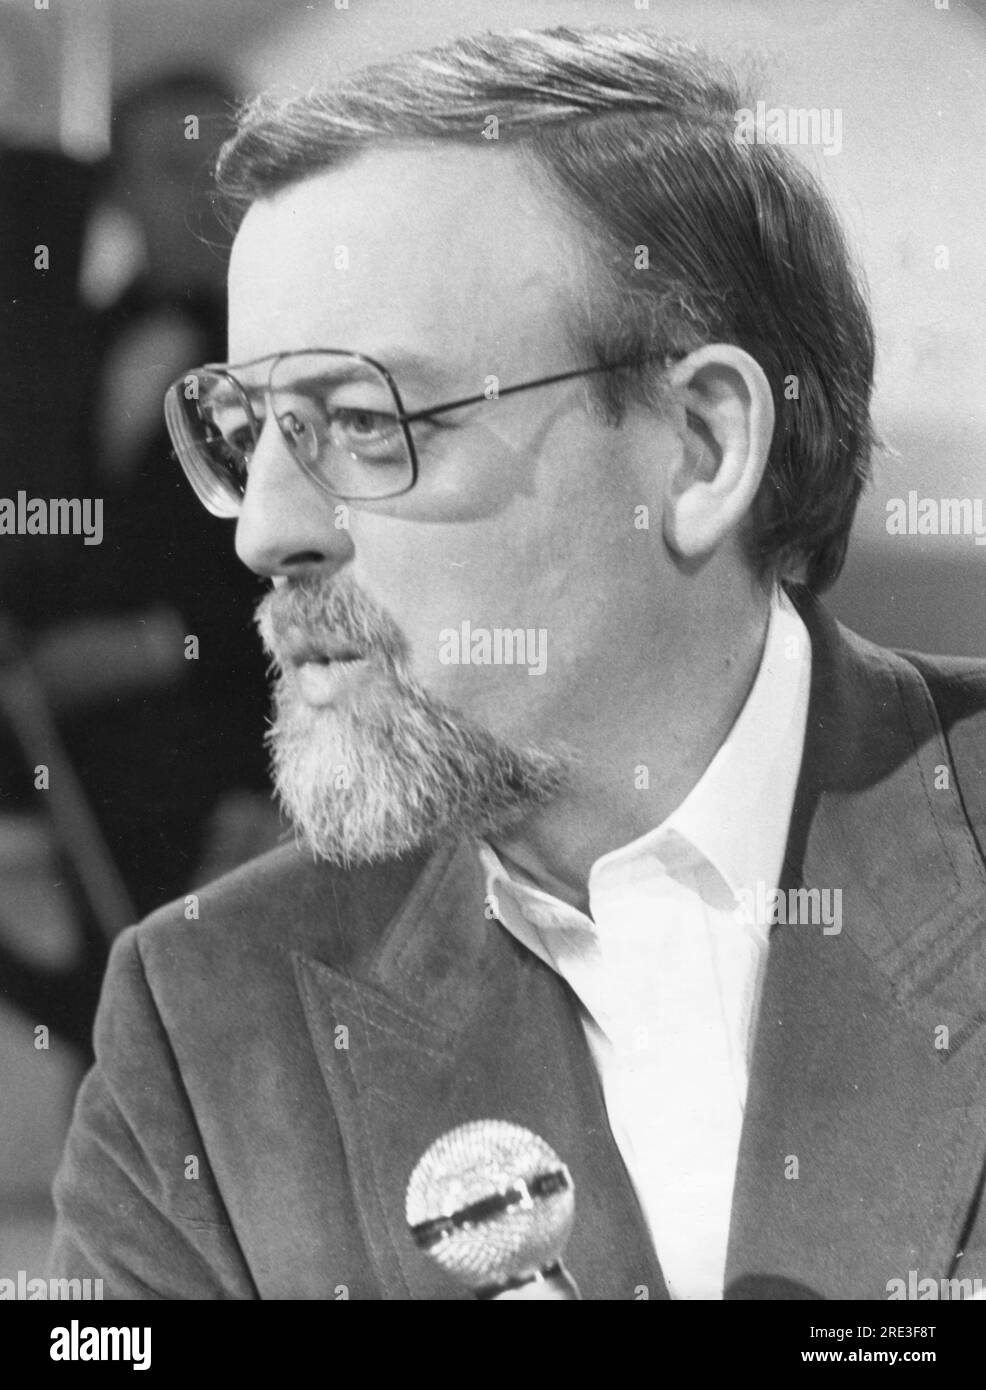 Whittaker, Roger, * 22.3.1936, British singer, during a performance, Germany, circa 1980, ADDITIONAL-RIGHTS-CLEARANCE-INFO-NOT-AVAILABLE Stock Photo